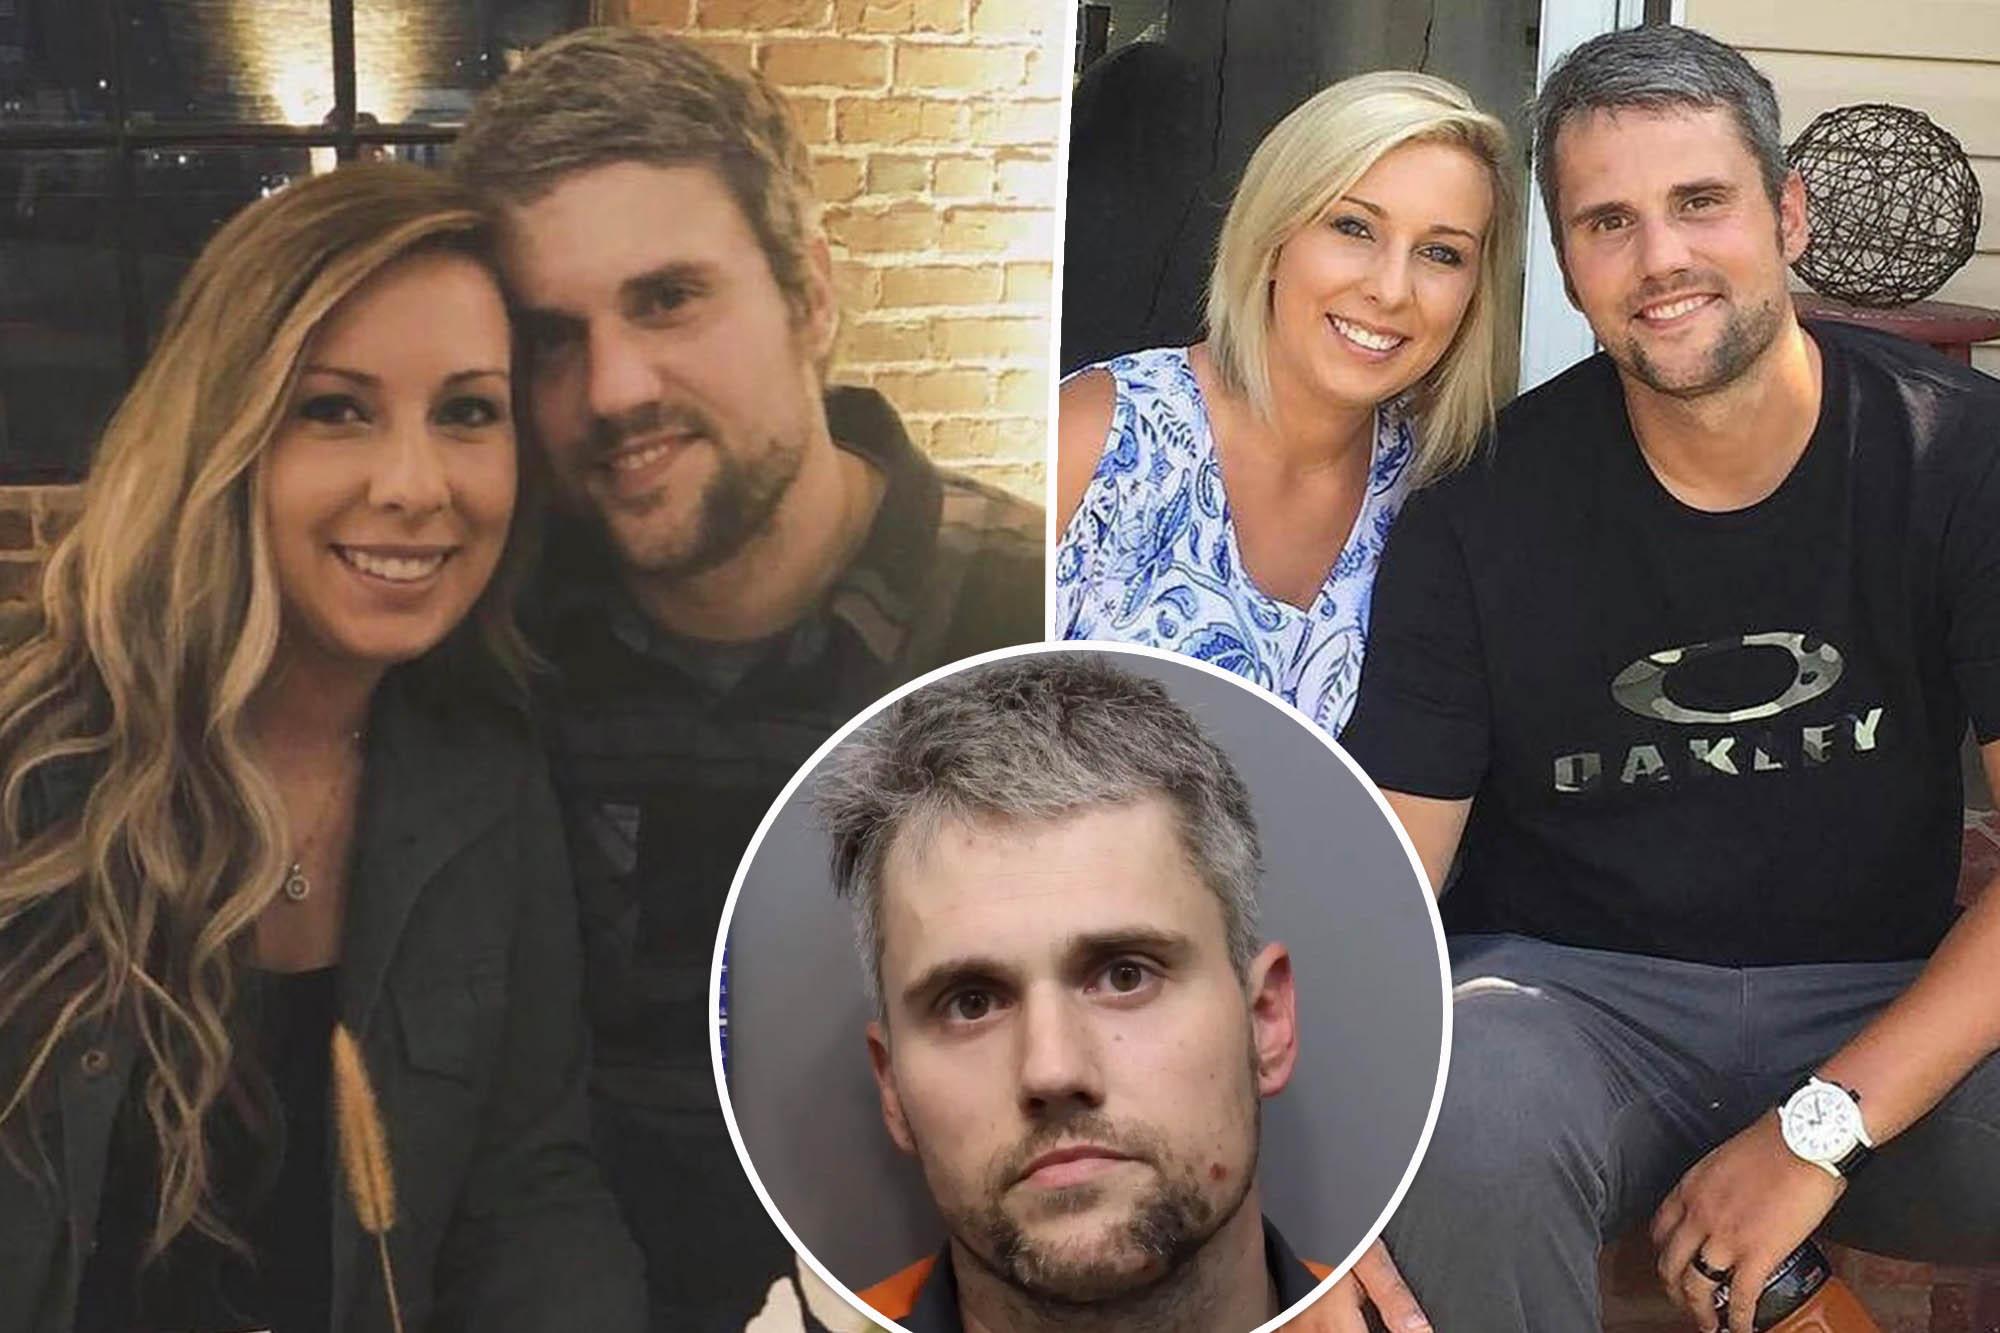 [2000x1333]Teen Mom' alum Ryan Edwards allegedly held knife to wife's neck